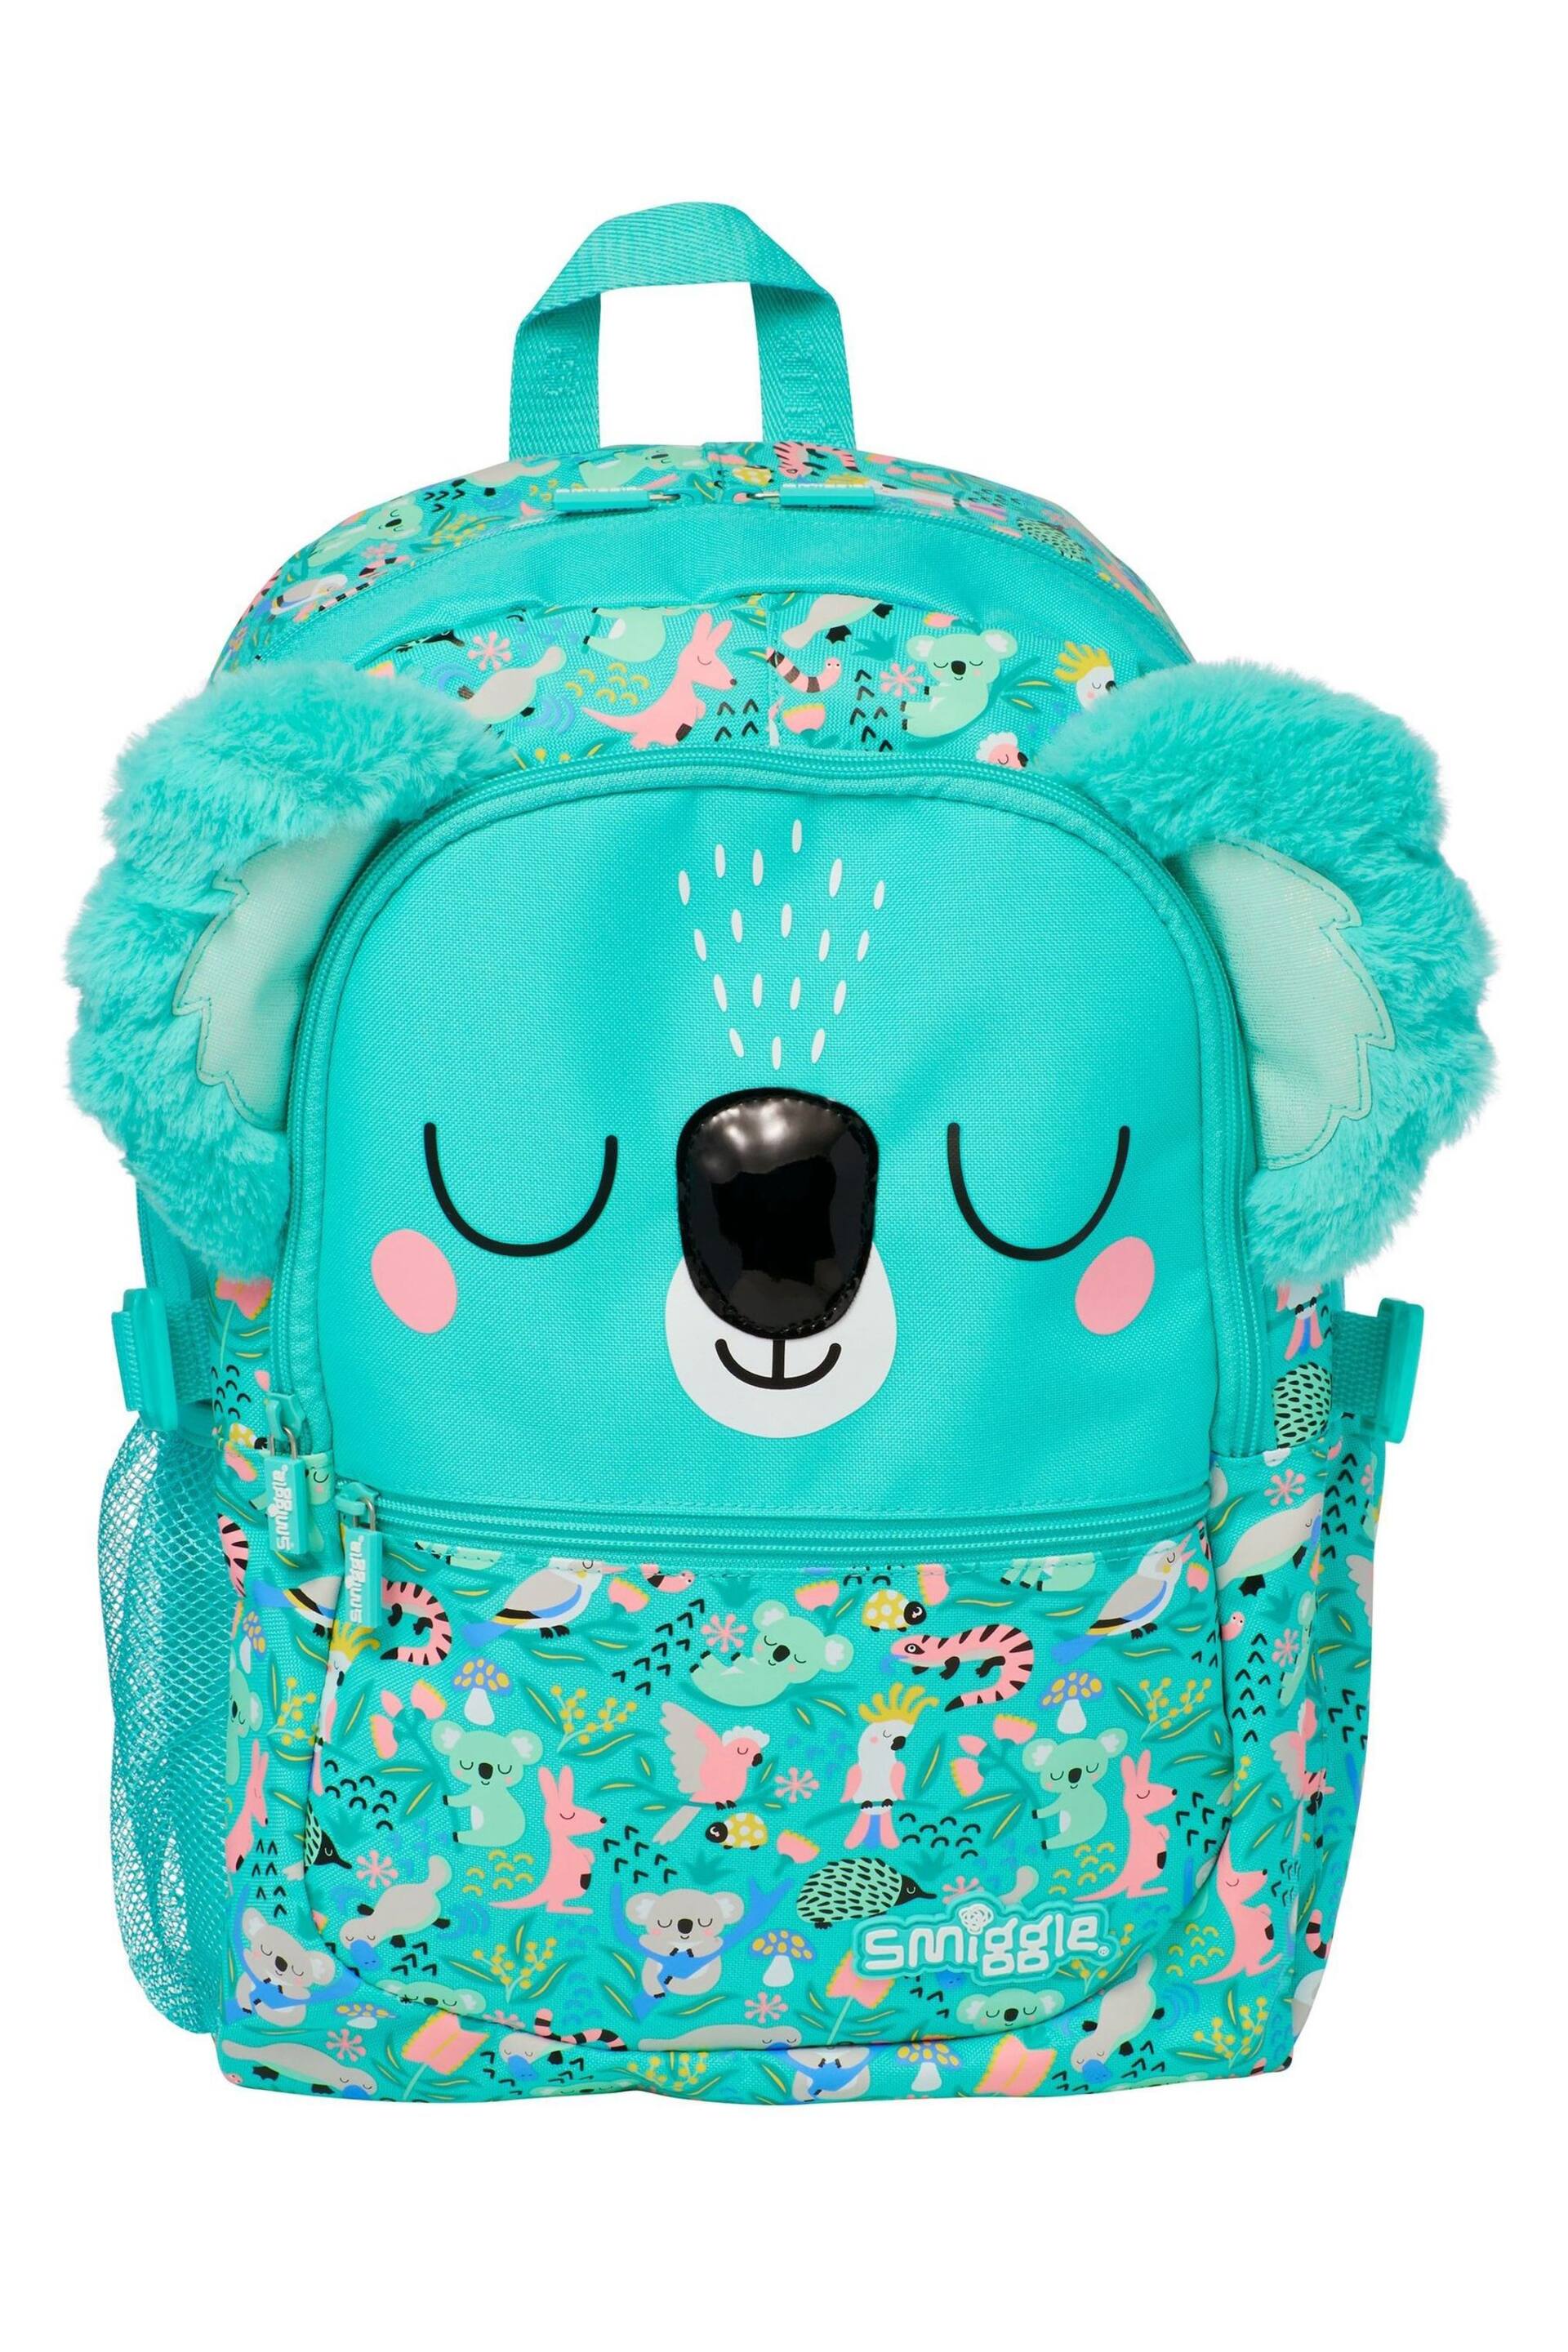 Smiggle Blue Hi There Classic Attach Backpack - Image 3 of 5